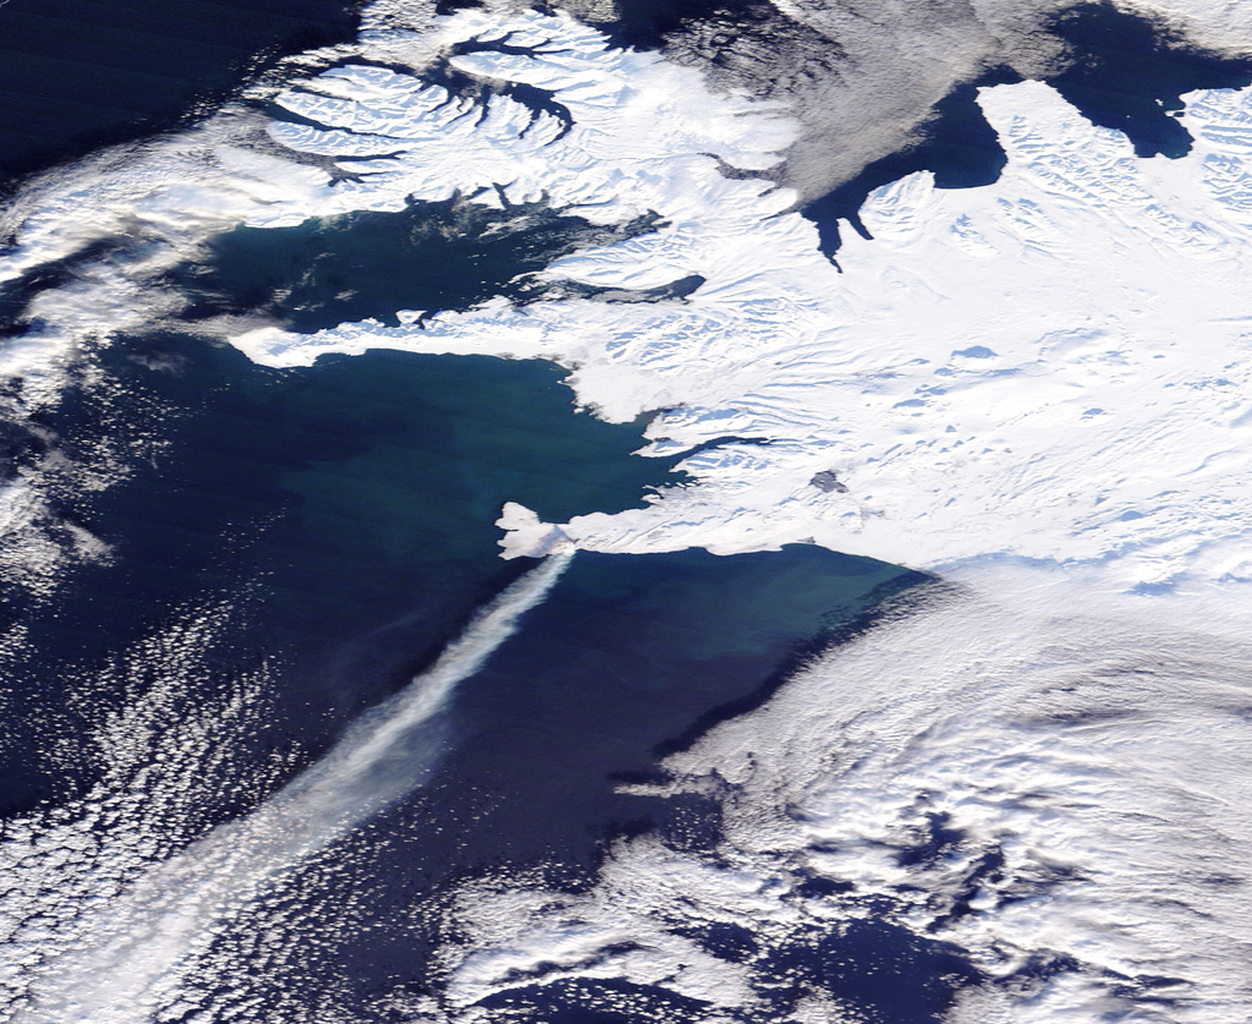 Lava flowed from the ground once again in southwestern Iceland, during the third eruption in a sequence that began in December 2023. NASA’s Terra satellite captured this view on Feb. 9, 2024, showing a plume of ash drifting out over the Atlantic Ocean. The eruption lasted only one day, but geologists think more are likely to follow.